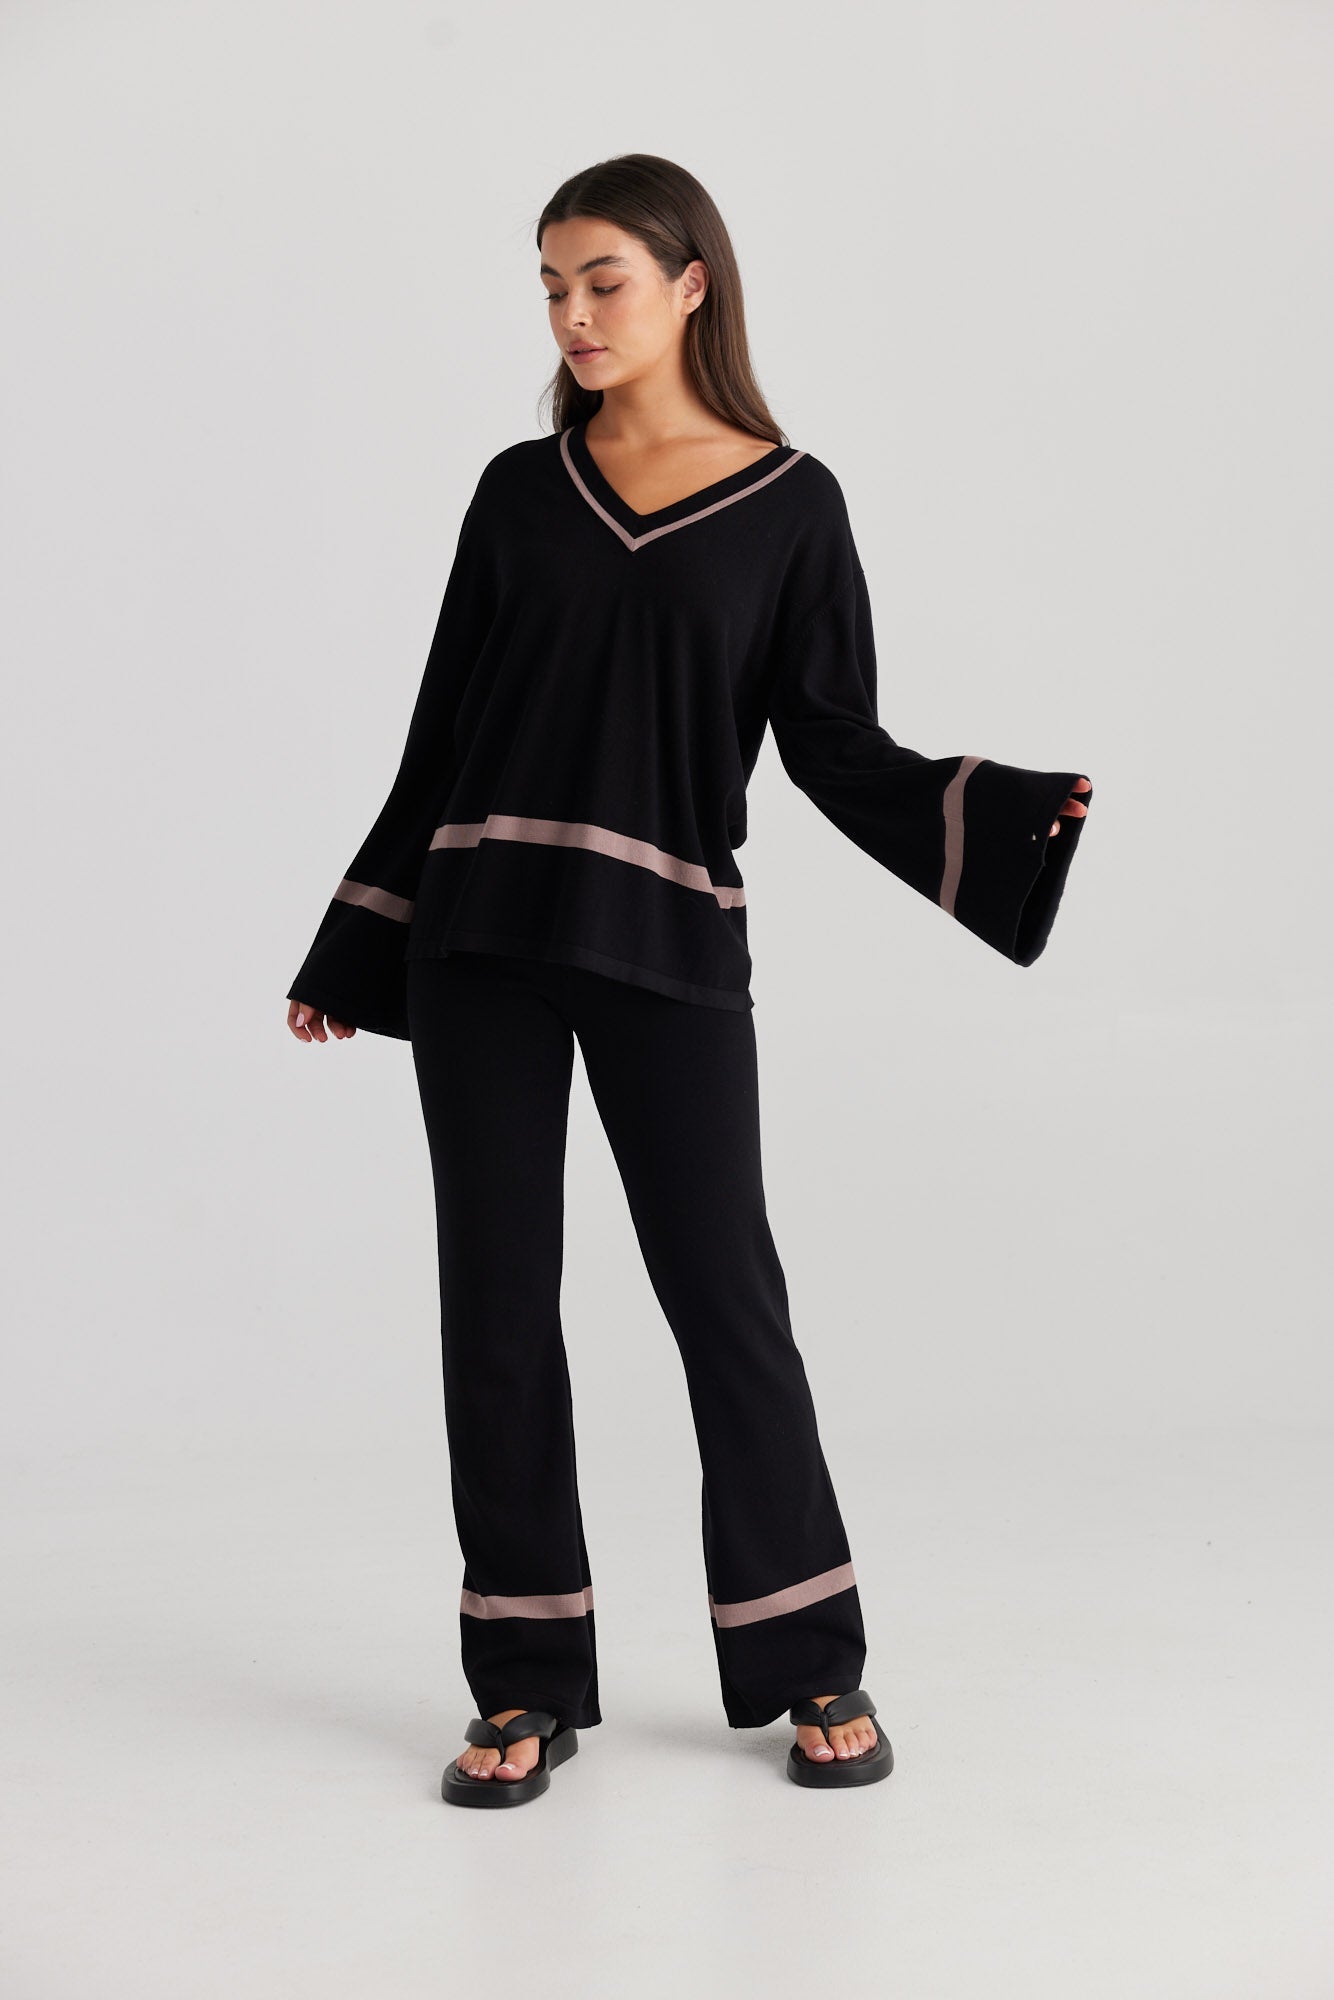 Annie Knit Top - Black-Tops-Daisy Says-The Bay Room